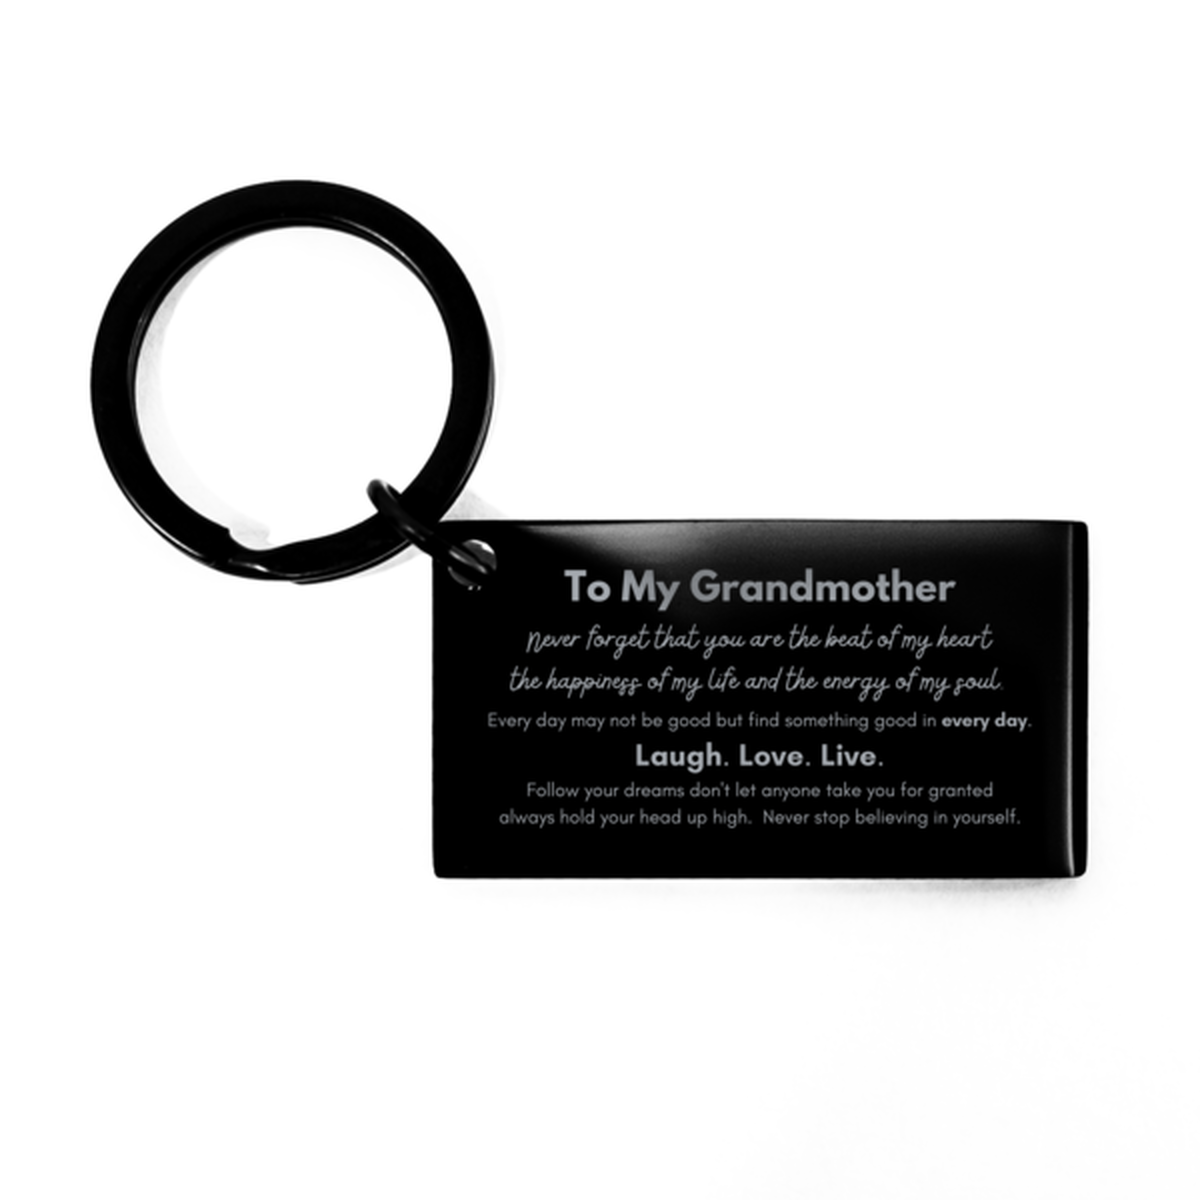 To My Grandmother Keyring Gifts, Christmas Grandmother Keychain Present, Birthday Unique Motivational For Grandmother, To My Grandmother Never forget that you are the beat of my heart the happiness of my life and the energy of my soul